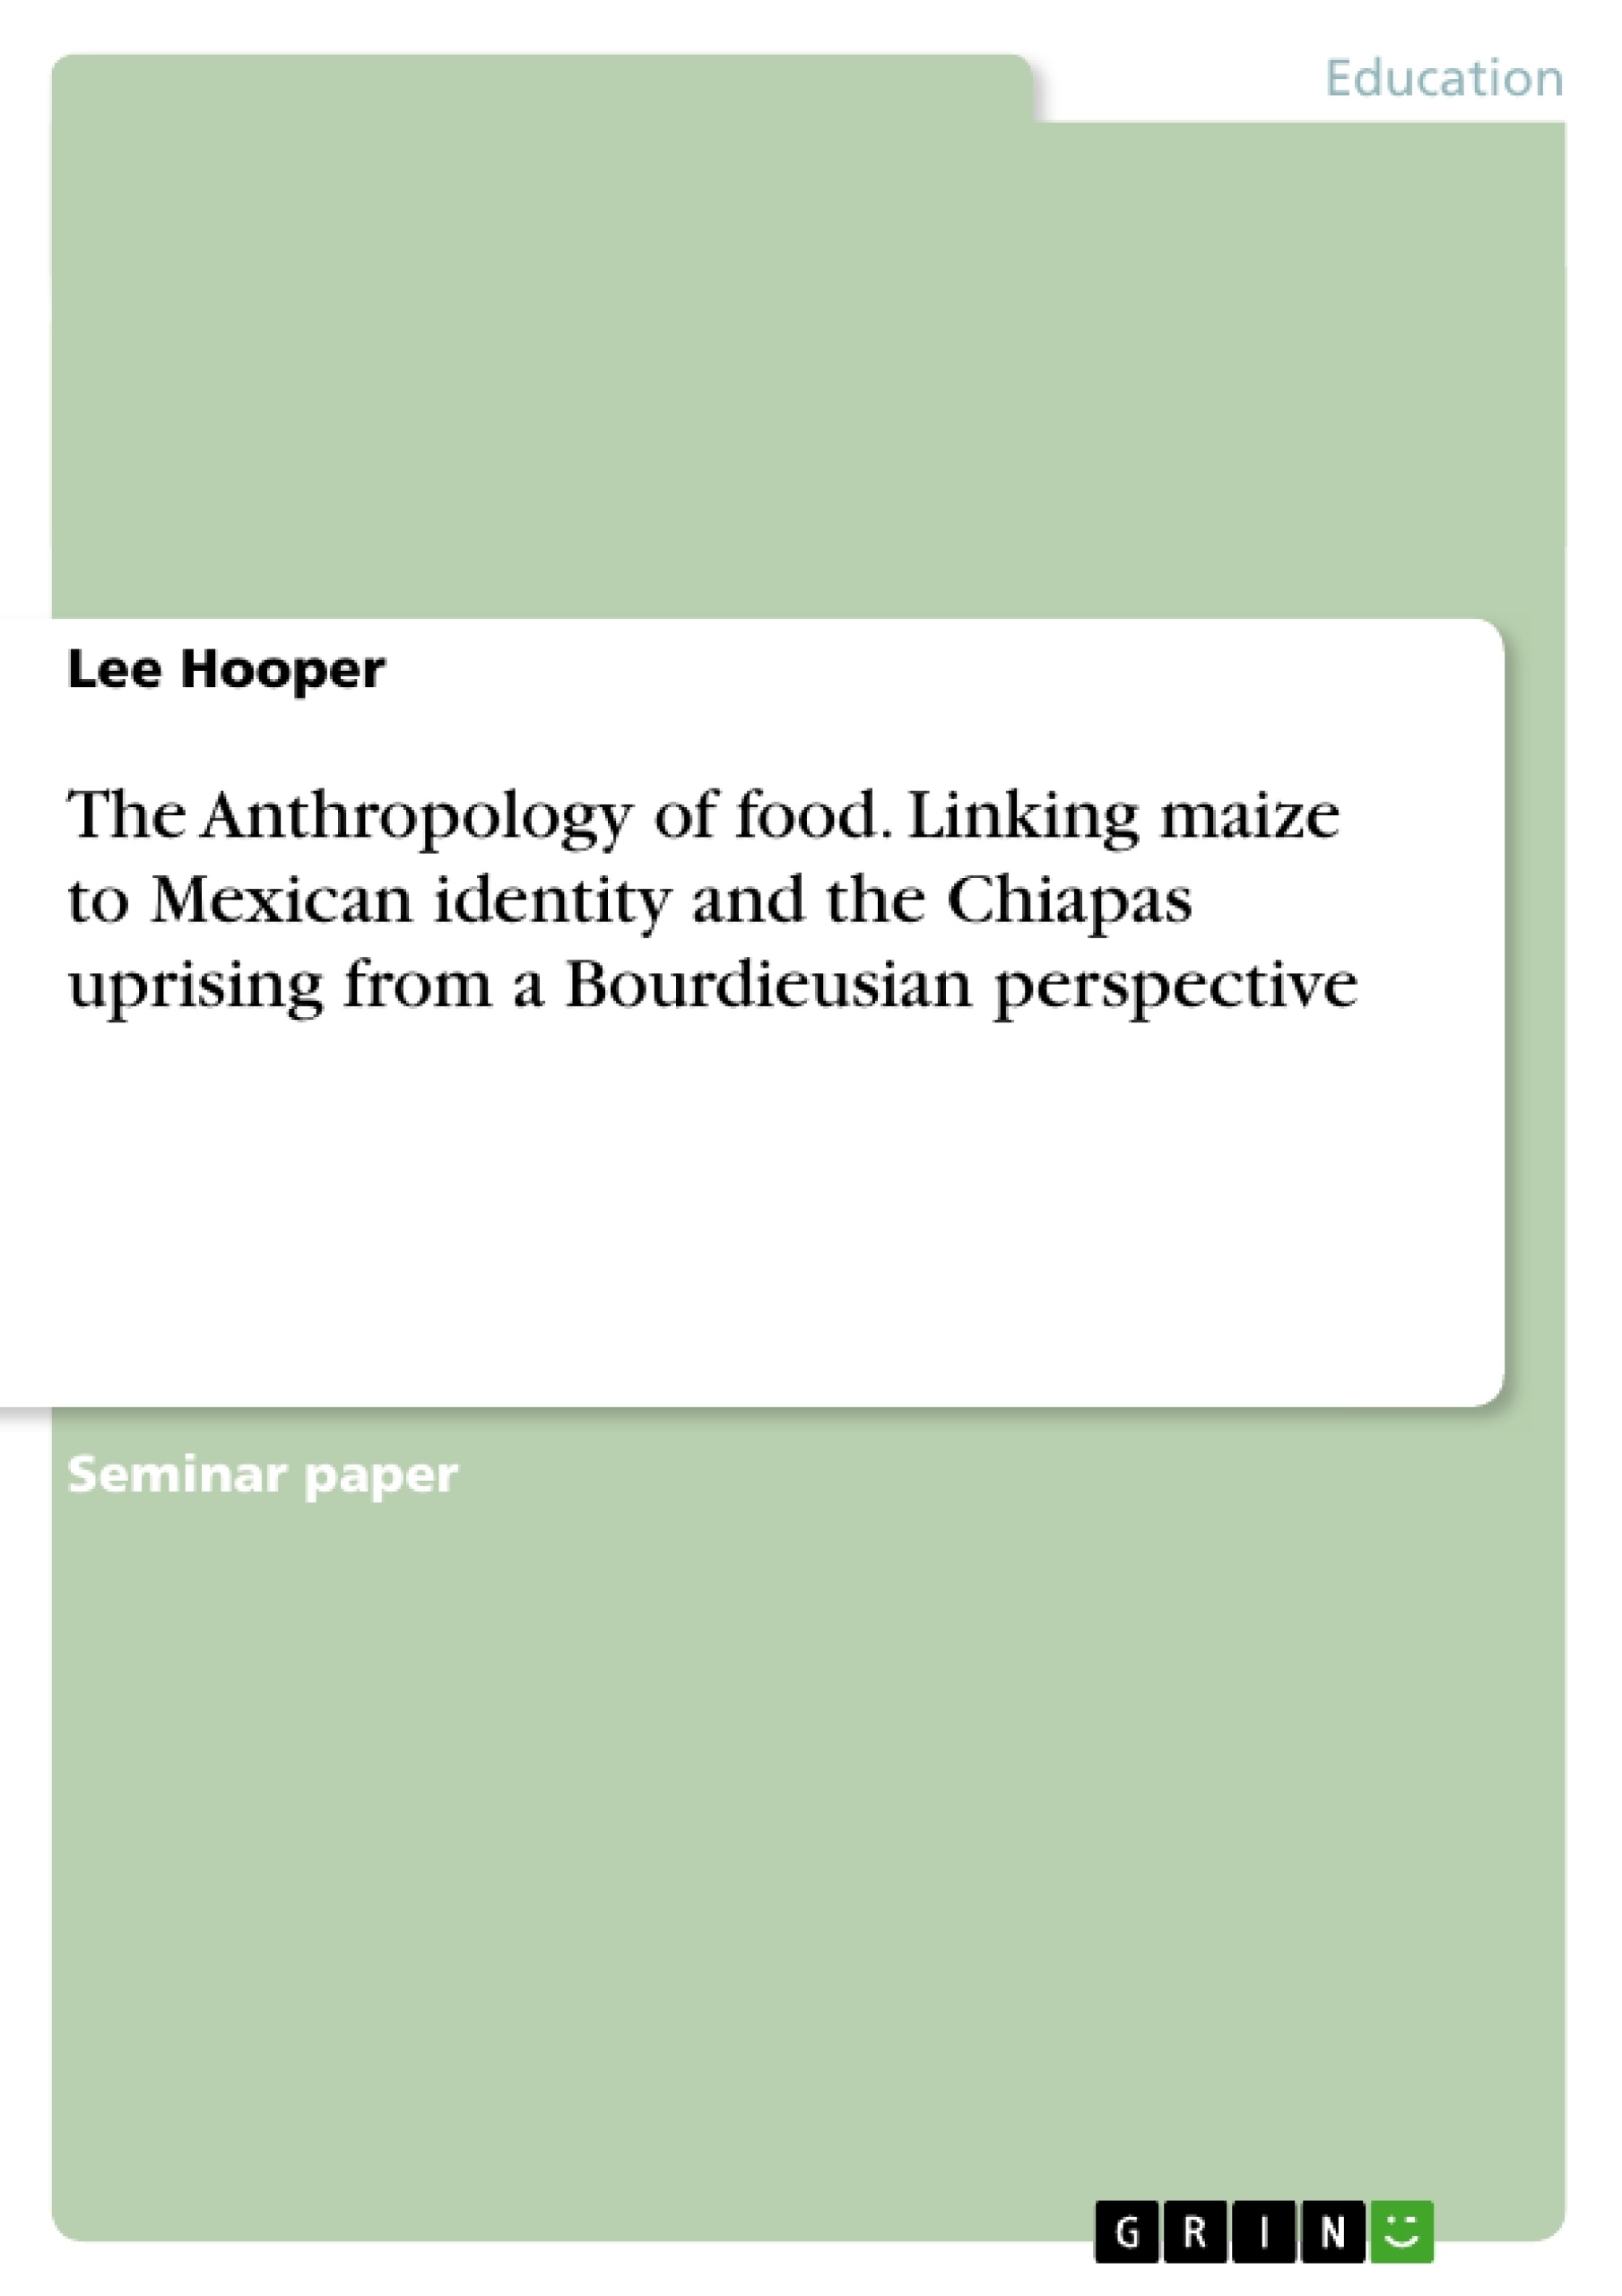 Titre: The Anthropology of food. Linking maize to Mexican identity and the Chiapas uprising from a Bourdieusian perspective